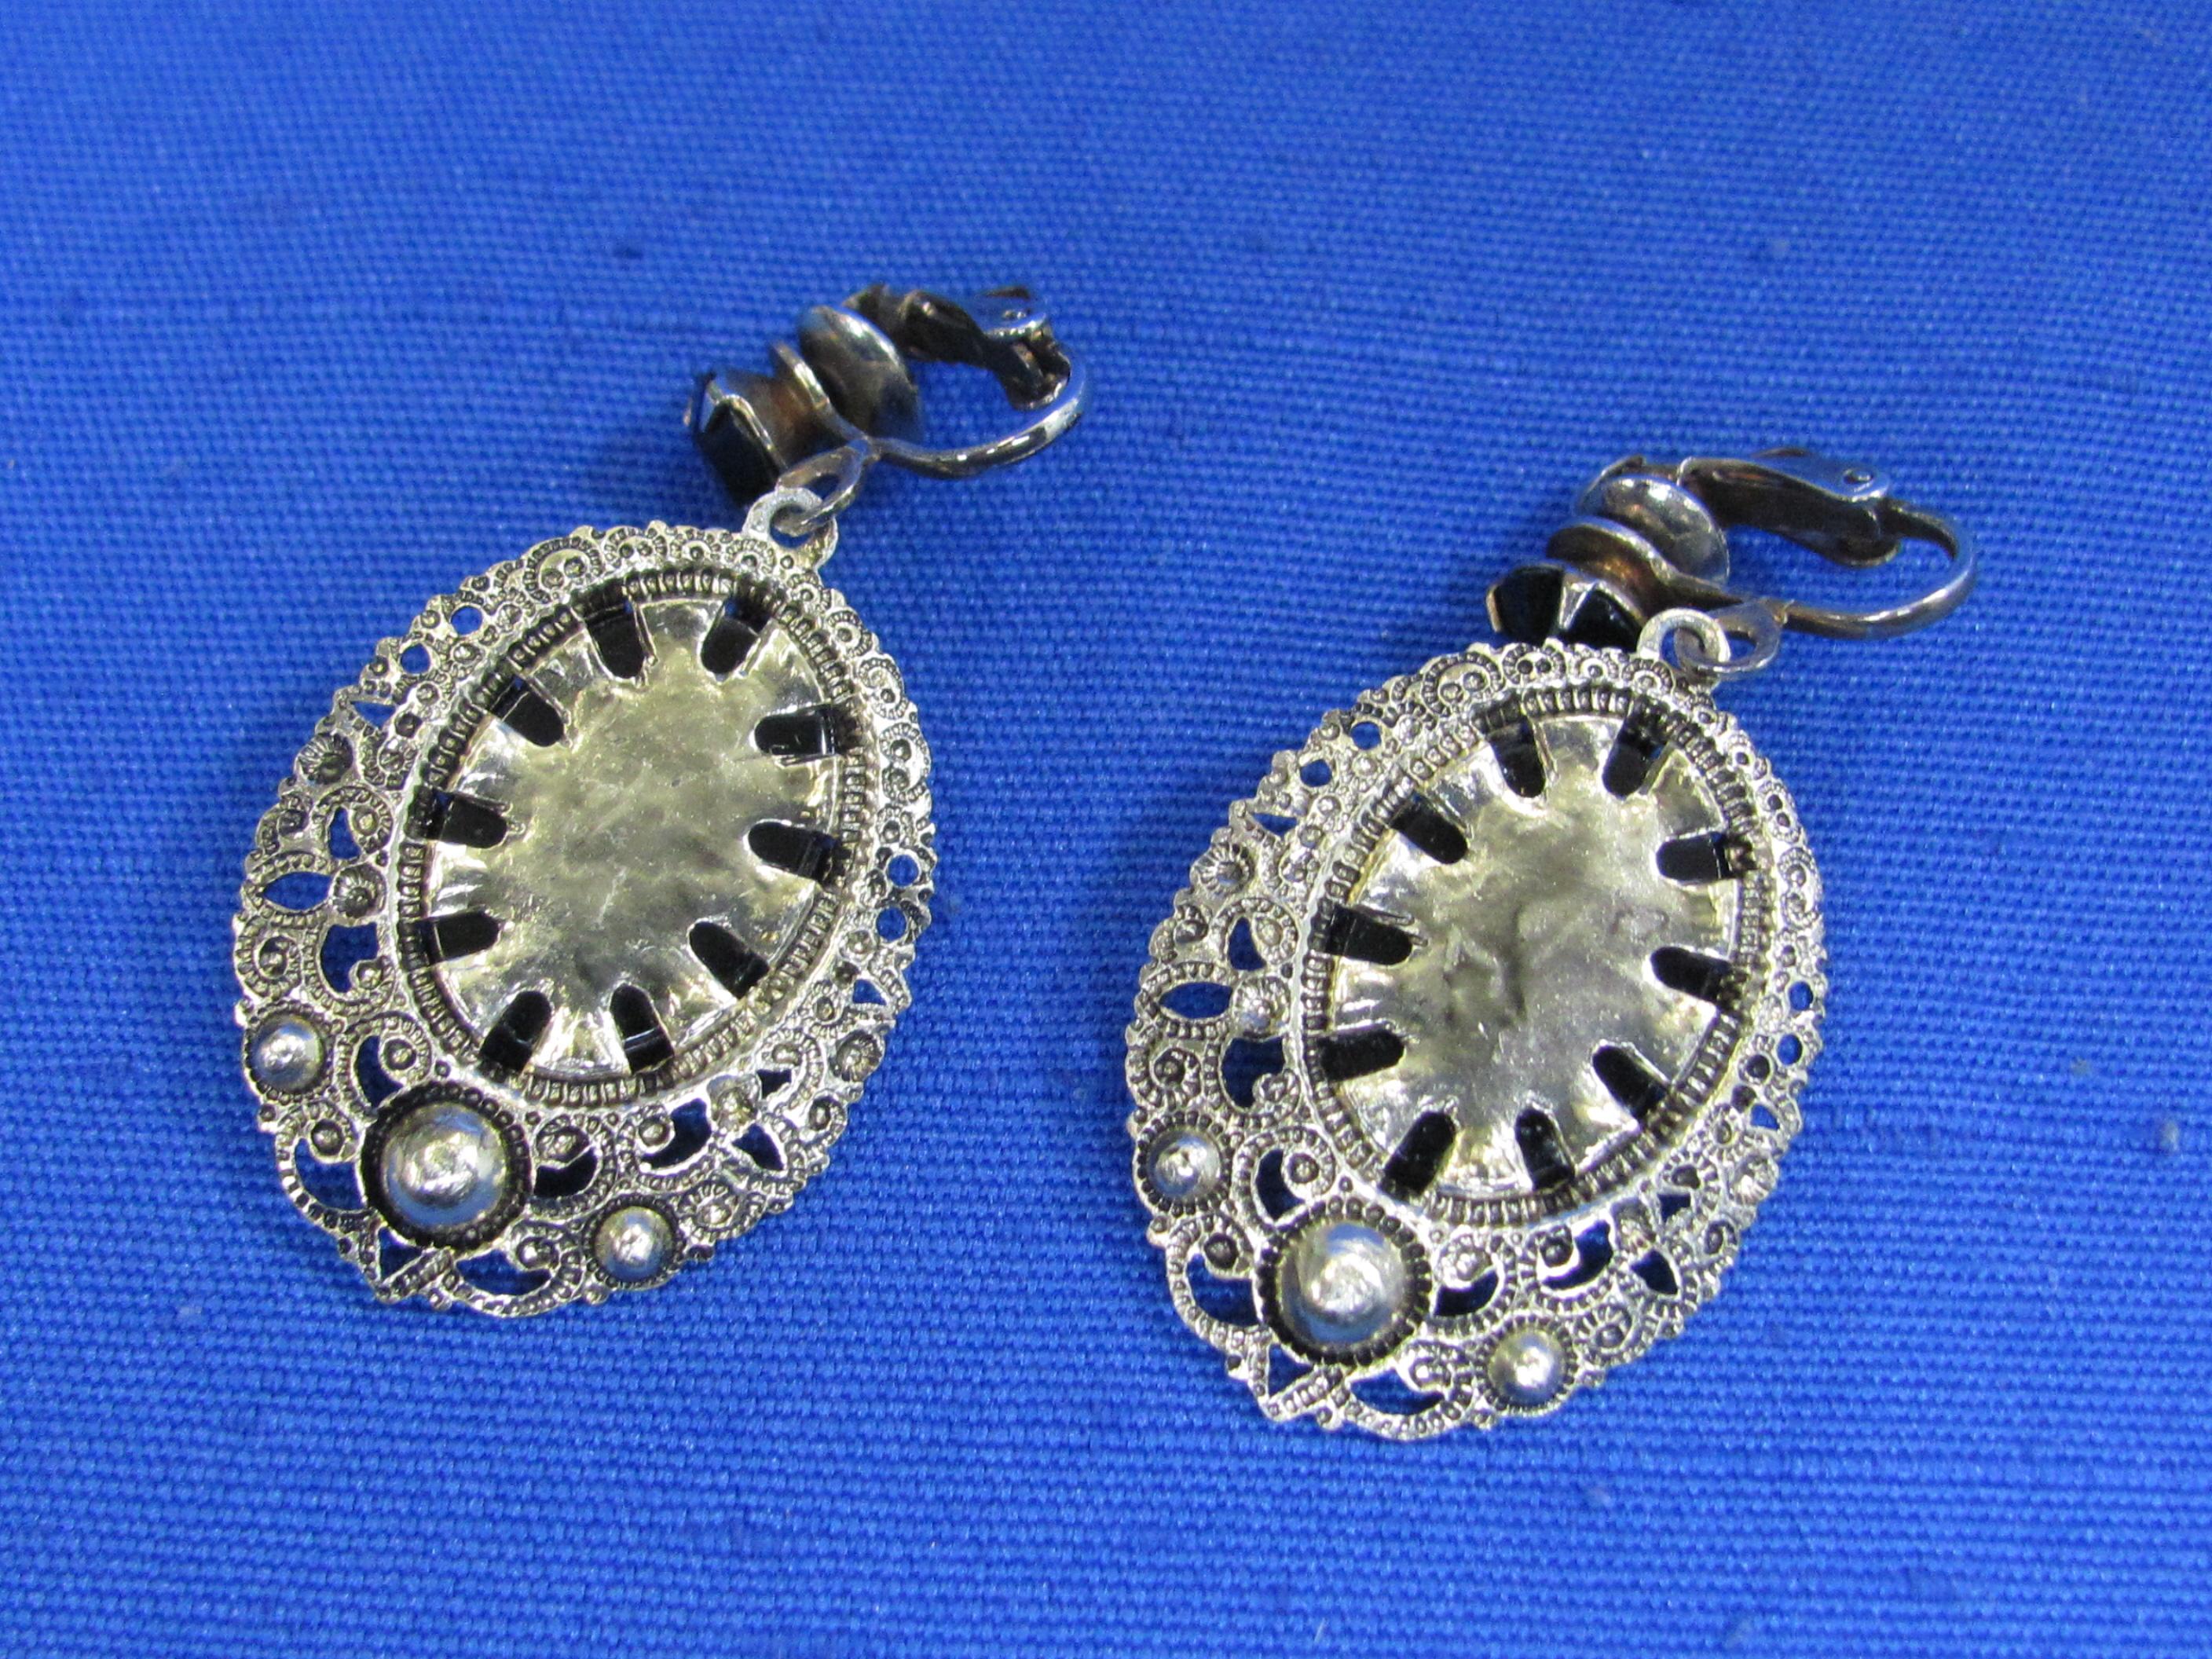 Vintage Cameo & Rhinestone Pin & Clip-on Earrings Set – Pin is 2 1/2” long